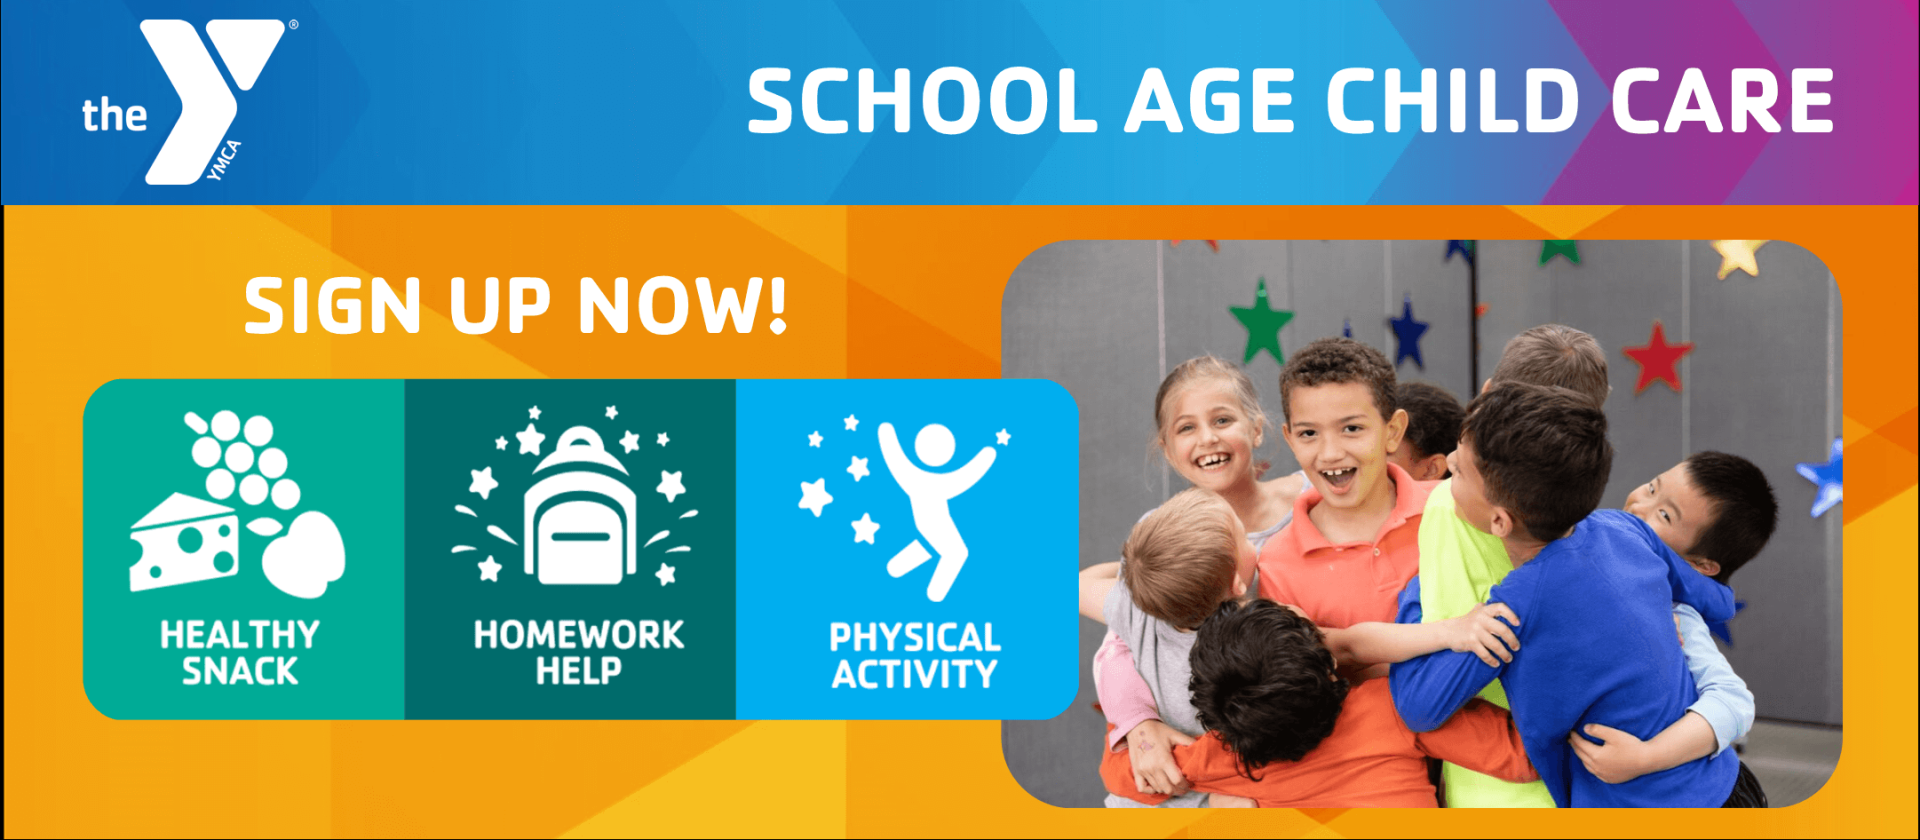 School Age Child Care from the Y. Sign up now! Healthy snack, homework help, and physical activity.